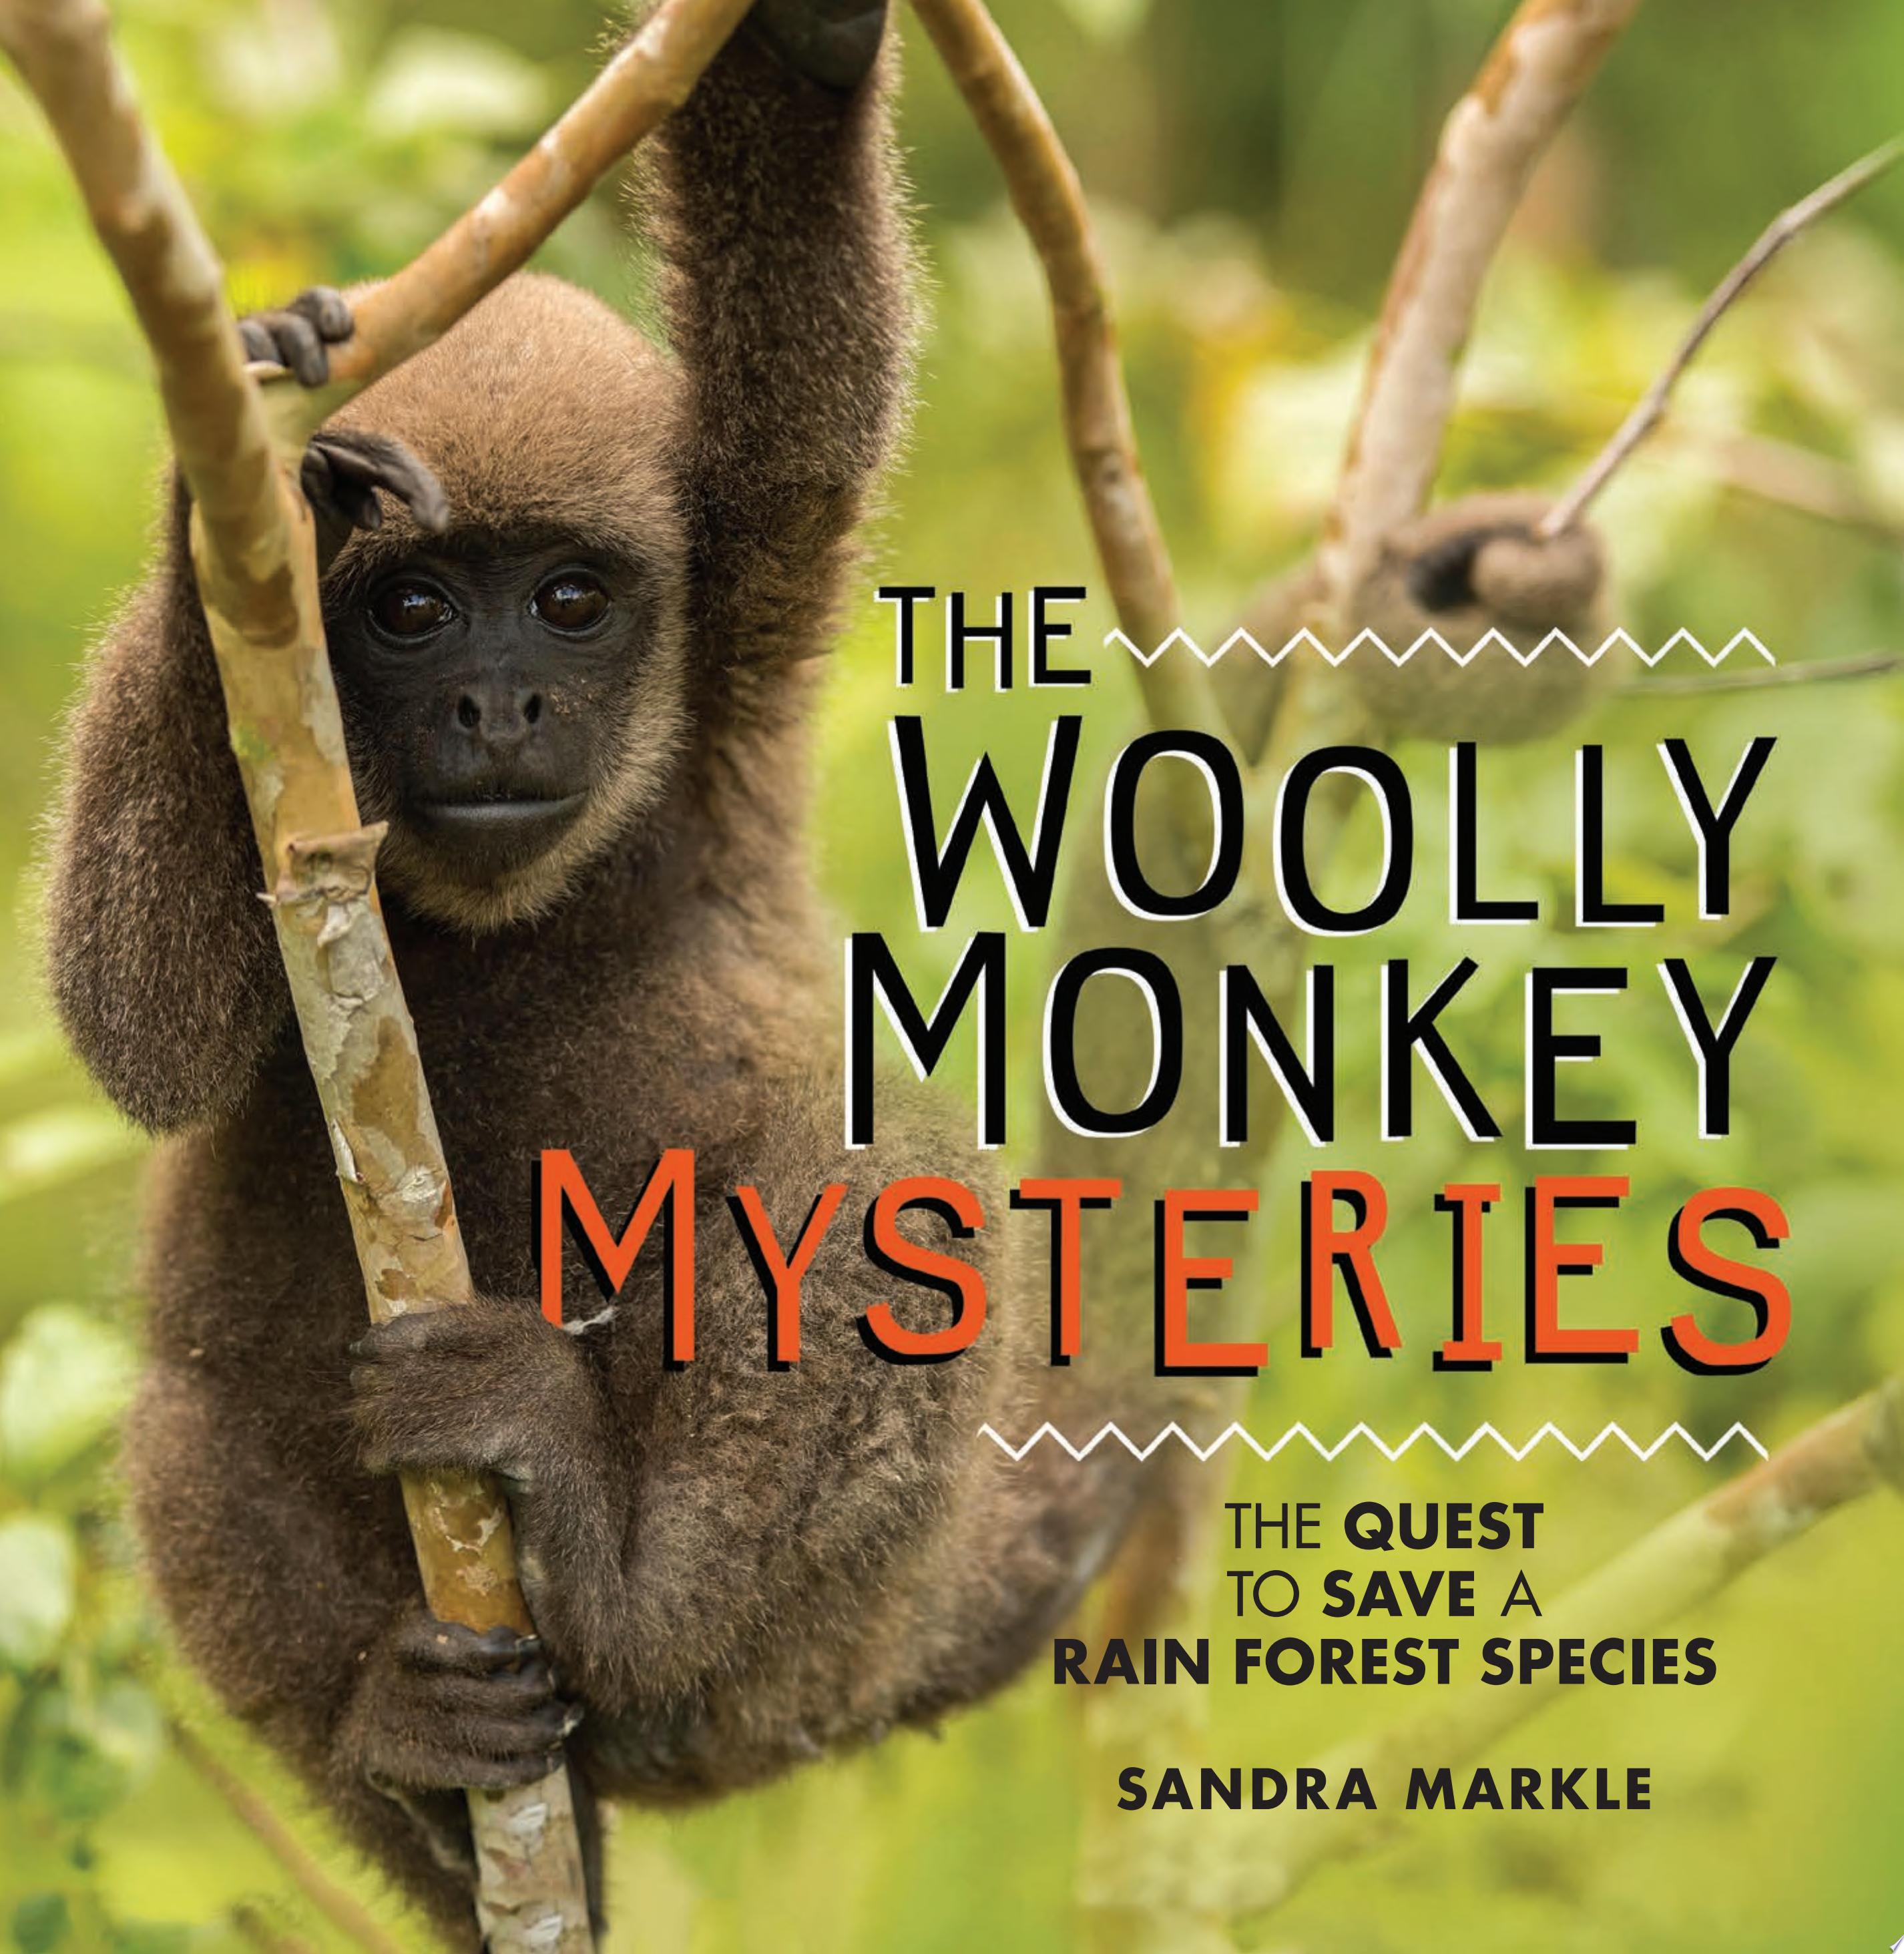 Image for "The Woolly Monkey Mysteries"